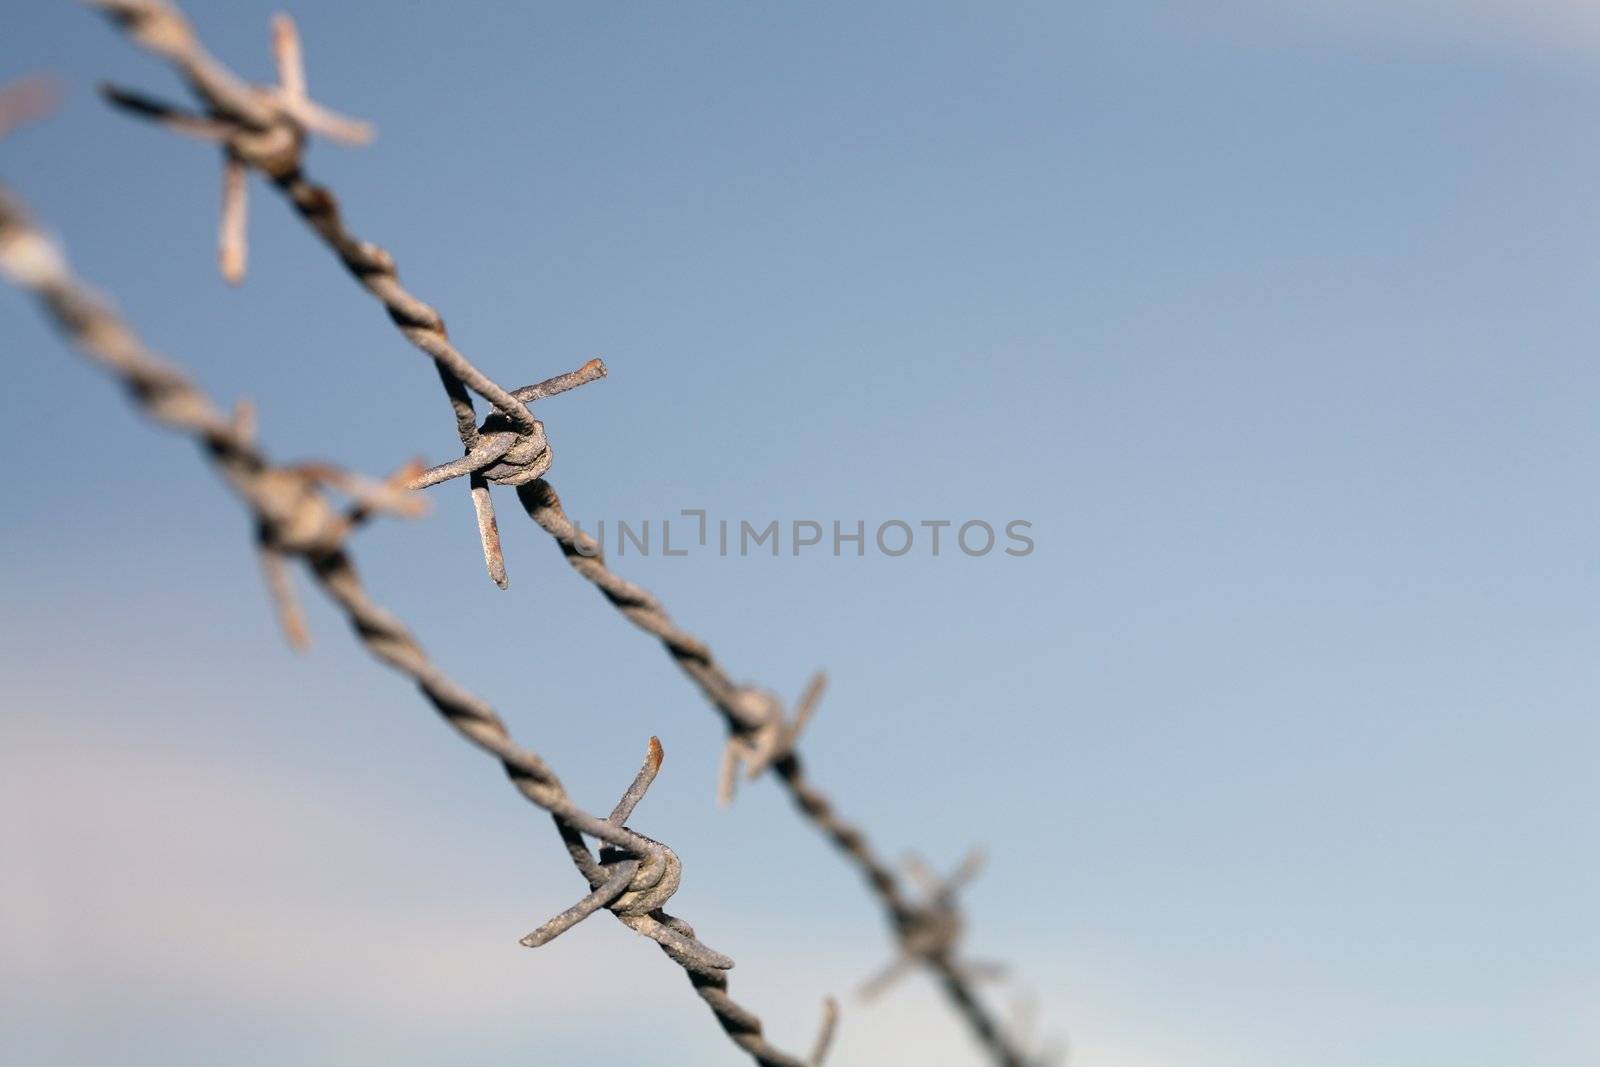 Barb wire by Stocksnapper